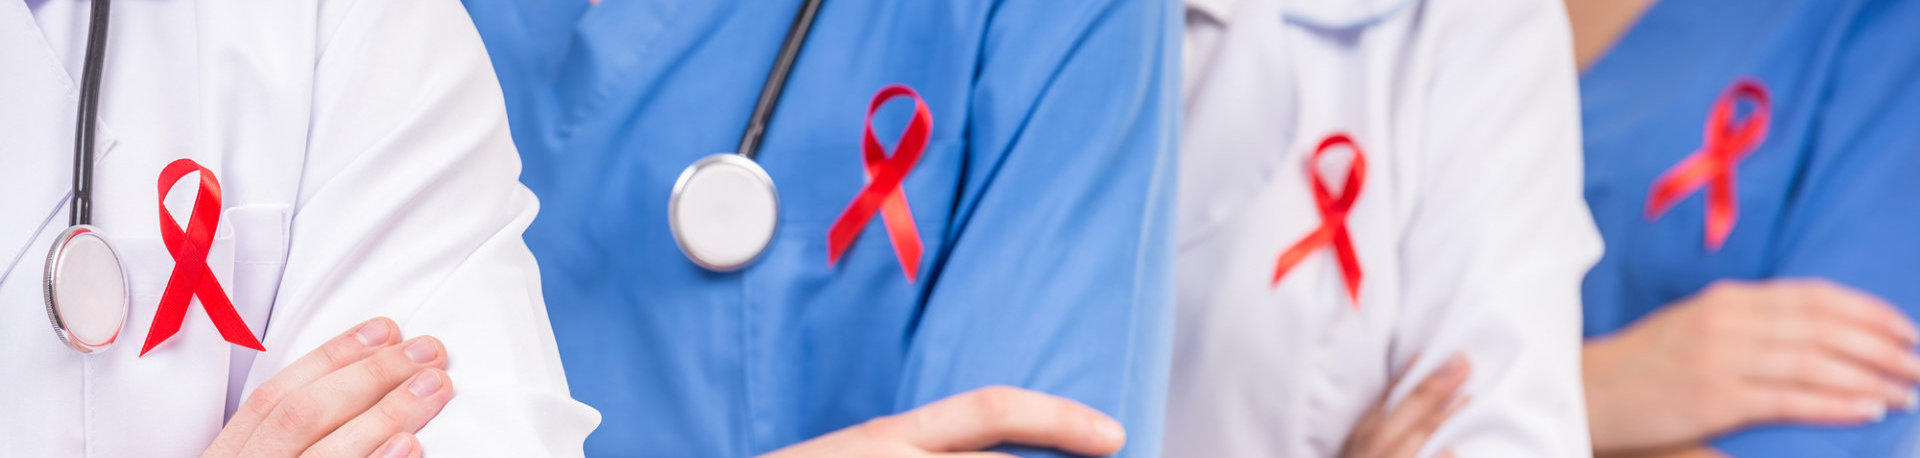 Doctors and Nurses with AIDS Red Ribbons